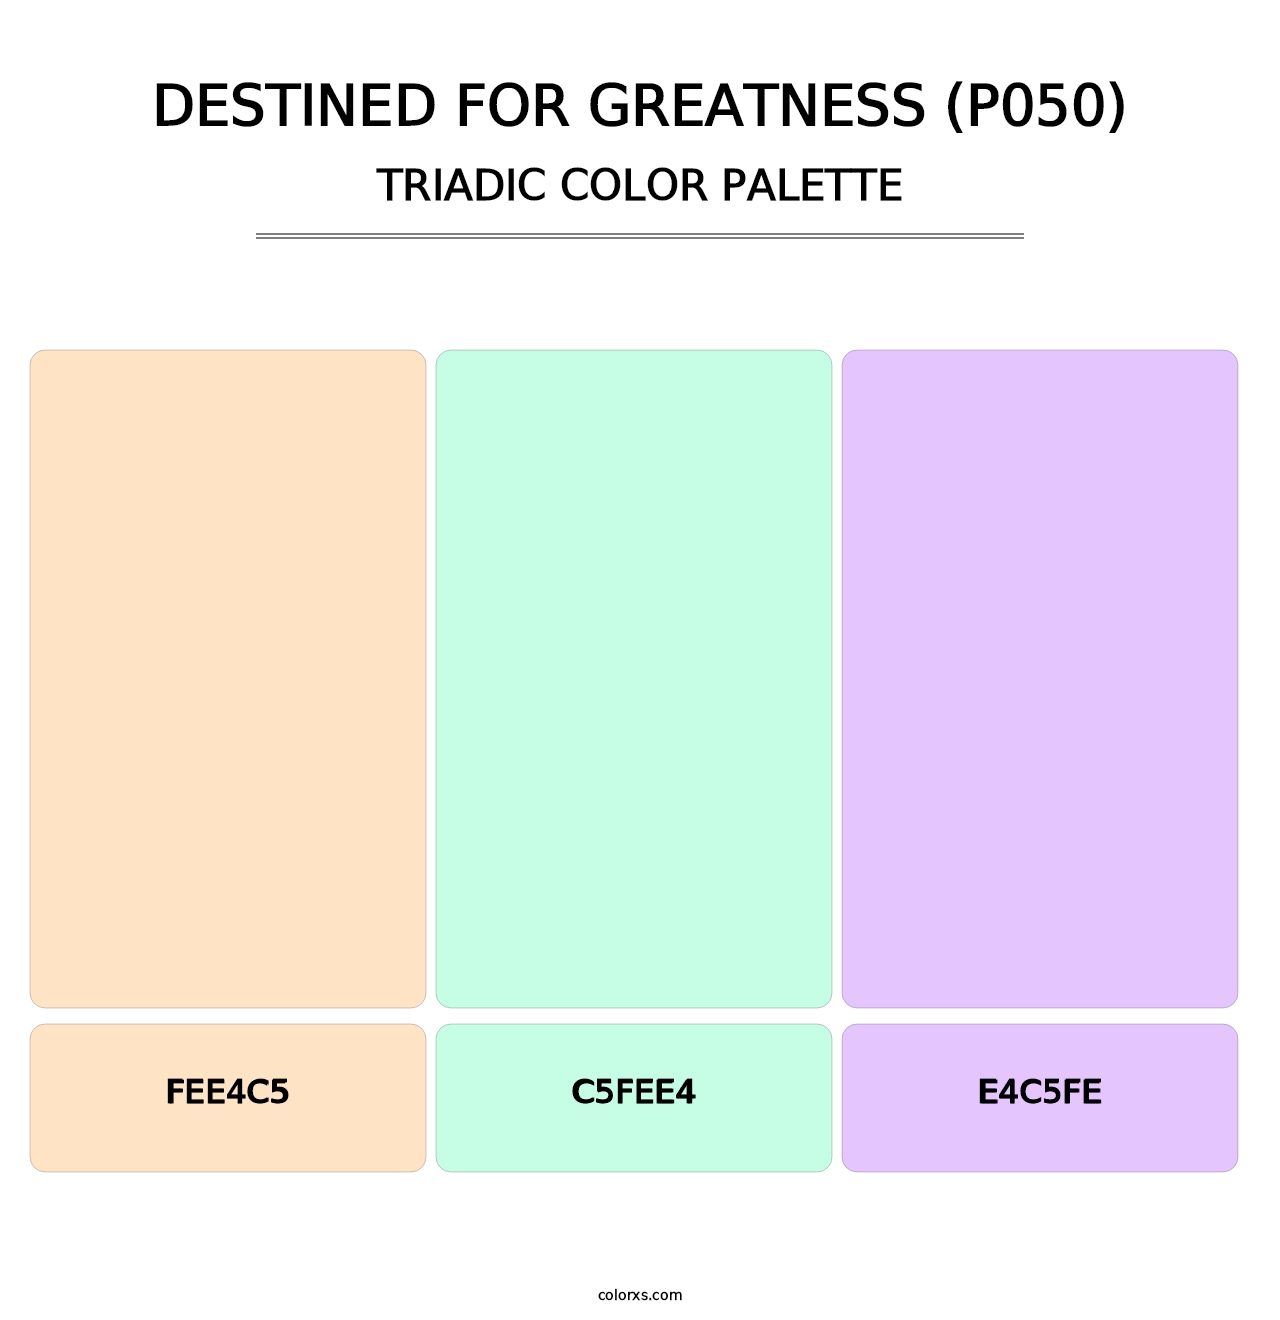 Destined for Greatness (P050) - Triadic Color Palette